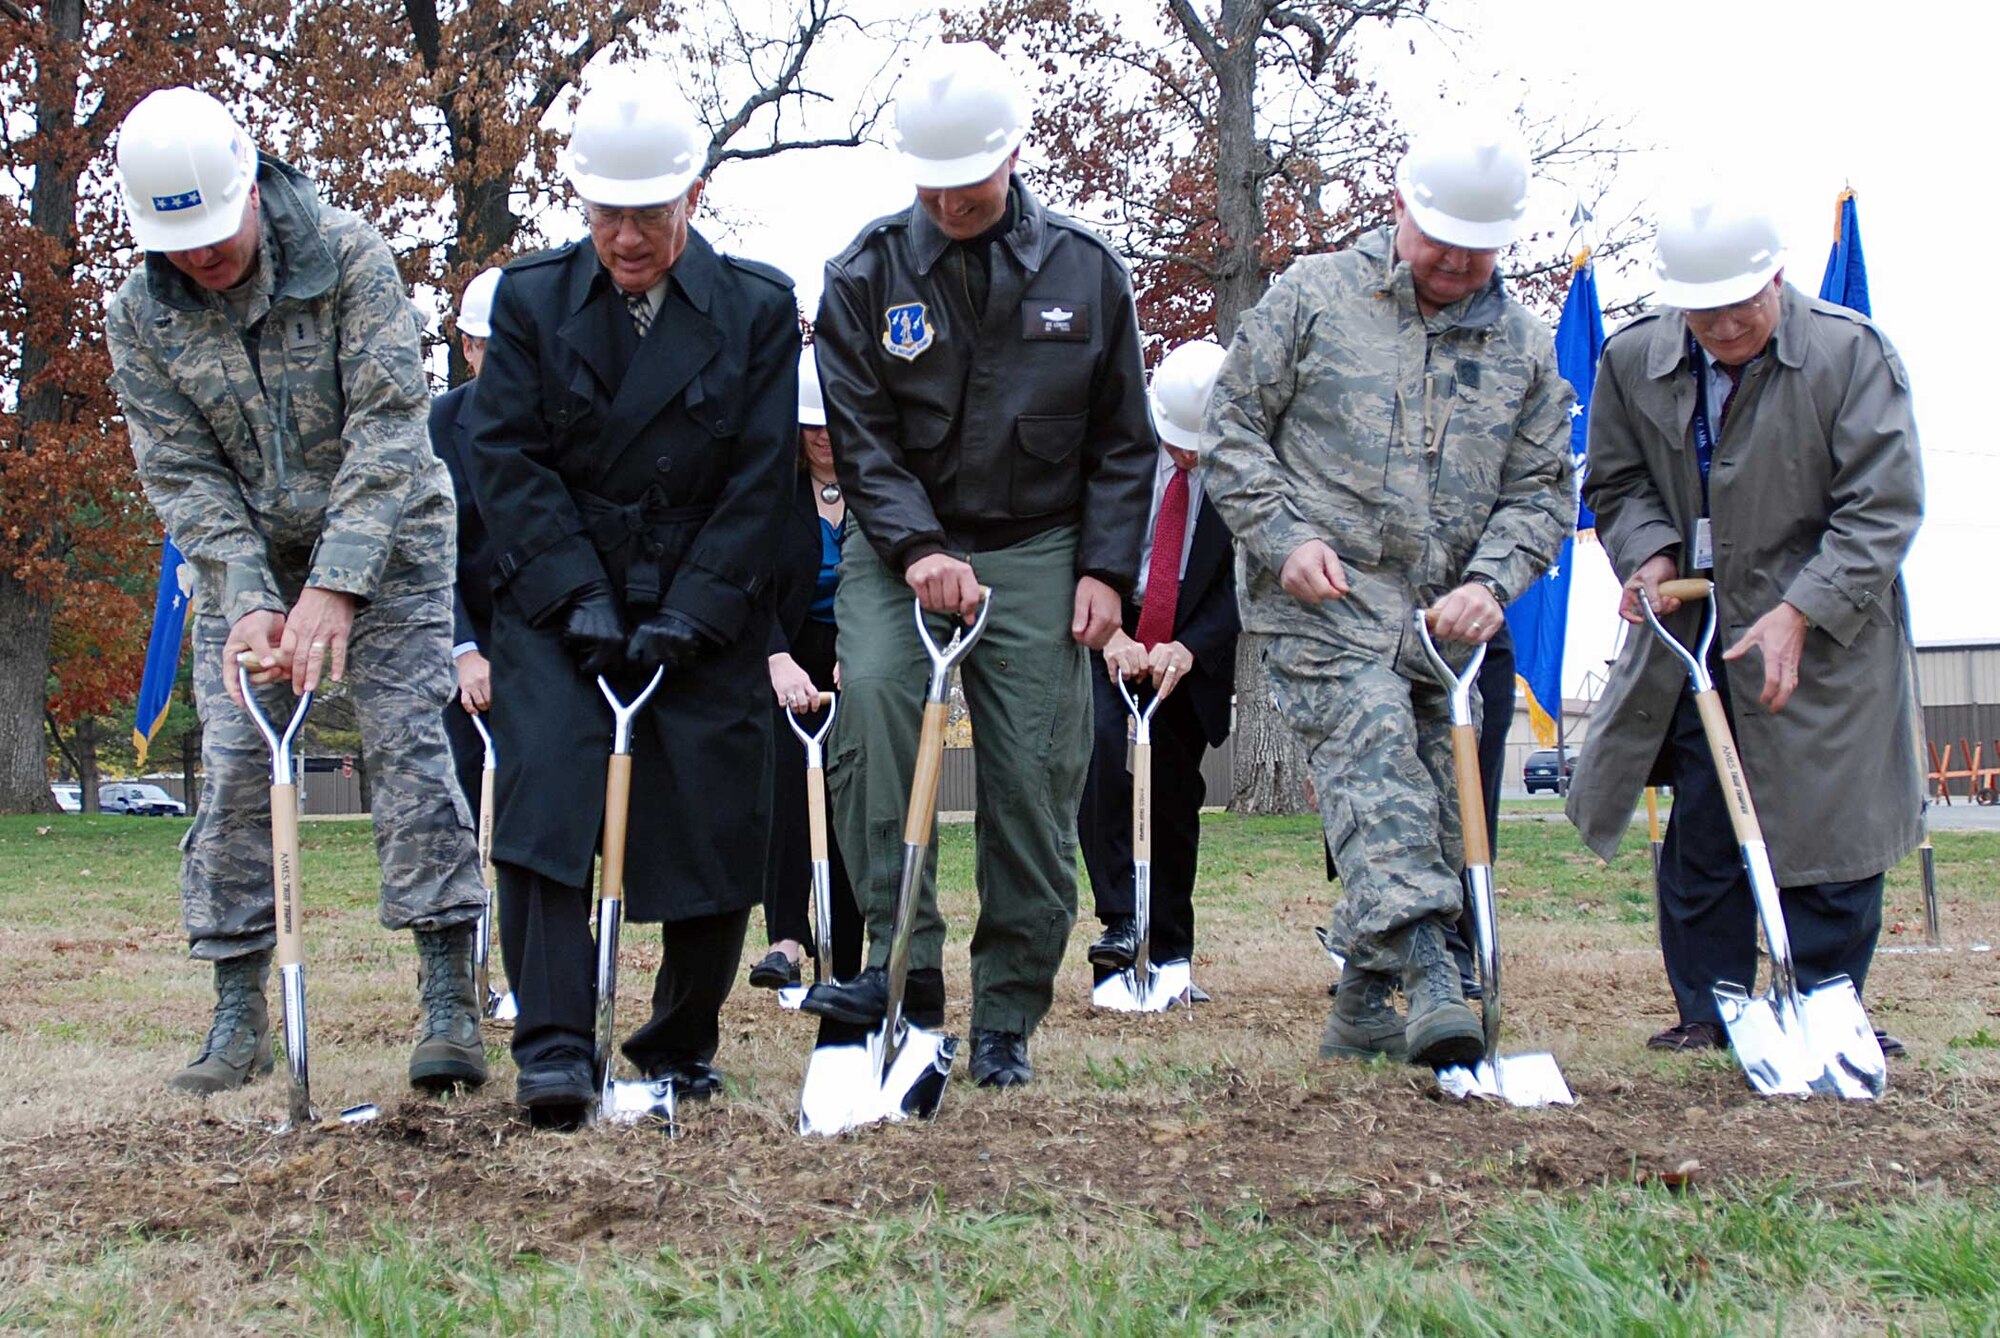 From left: Lt. Gen. Craig McKinley, director of the Air National Guard; retired Lt. Gen. John Conaway, former chief of the National Guard Bureau; Col. Joe Lengyel, ANGRC commander; Air Guard Command Chief Master Sgt. Richard Smith; and J.L. Herndon of Clarke Construction break ground on an ANGRC expansion project Nov. 19 at Andrews Air Force Base, Md. (Photo by Tech. Sgt. Mike R. Smith, National Guard Bureau)